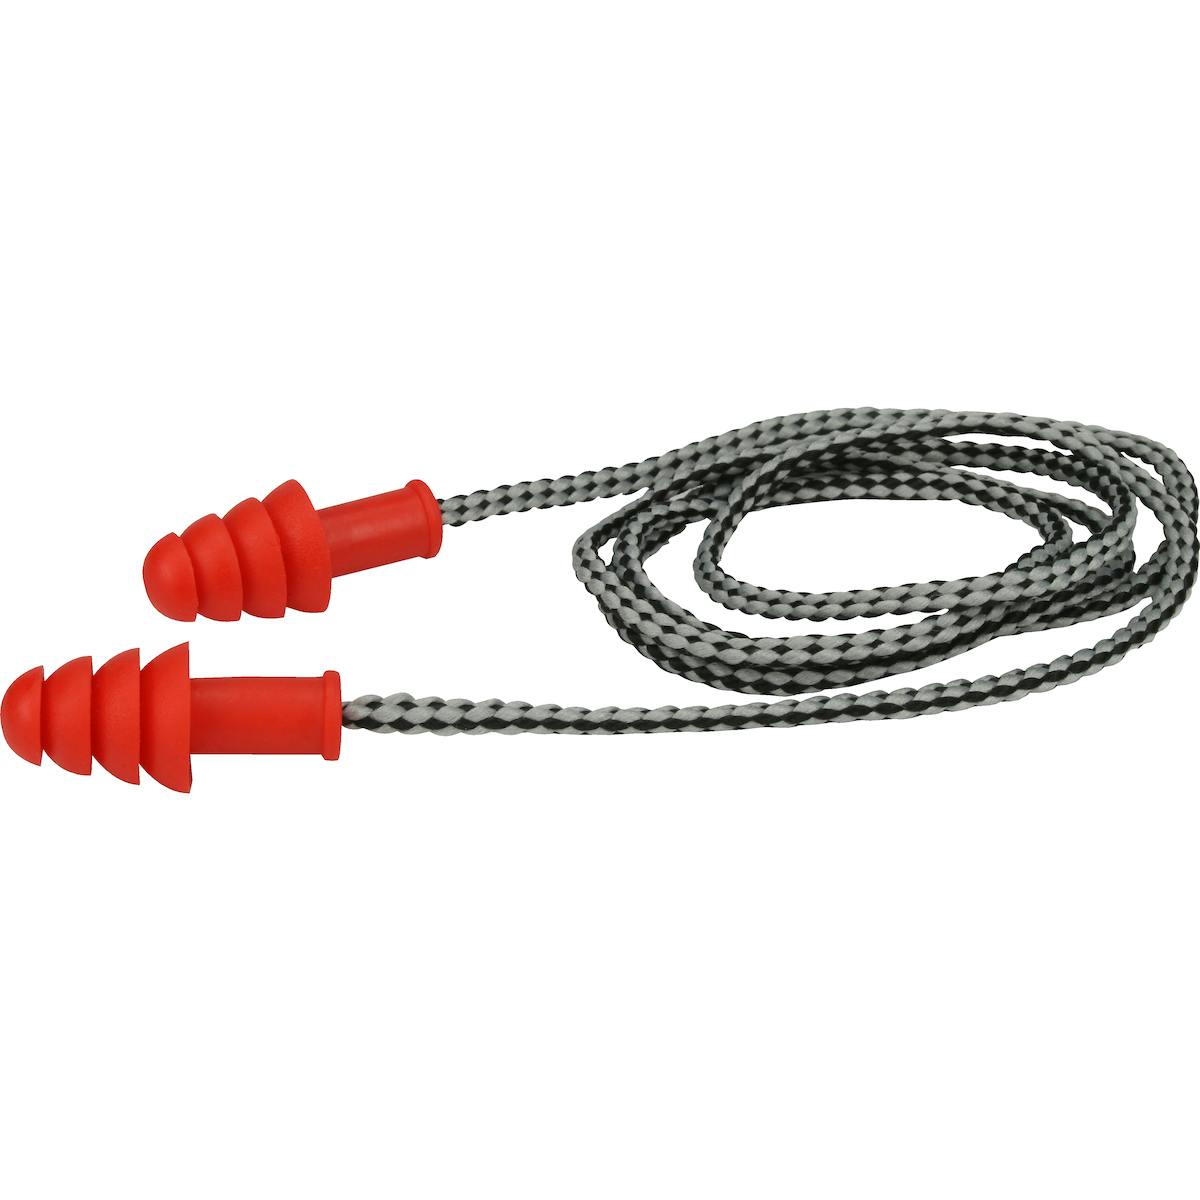 Reusable TPR Corded Ear Plugs - NRR 27, Red (267-HPR410C) - OS